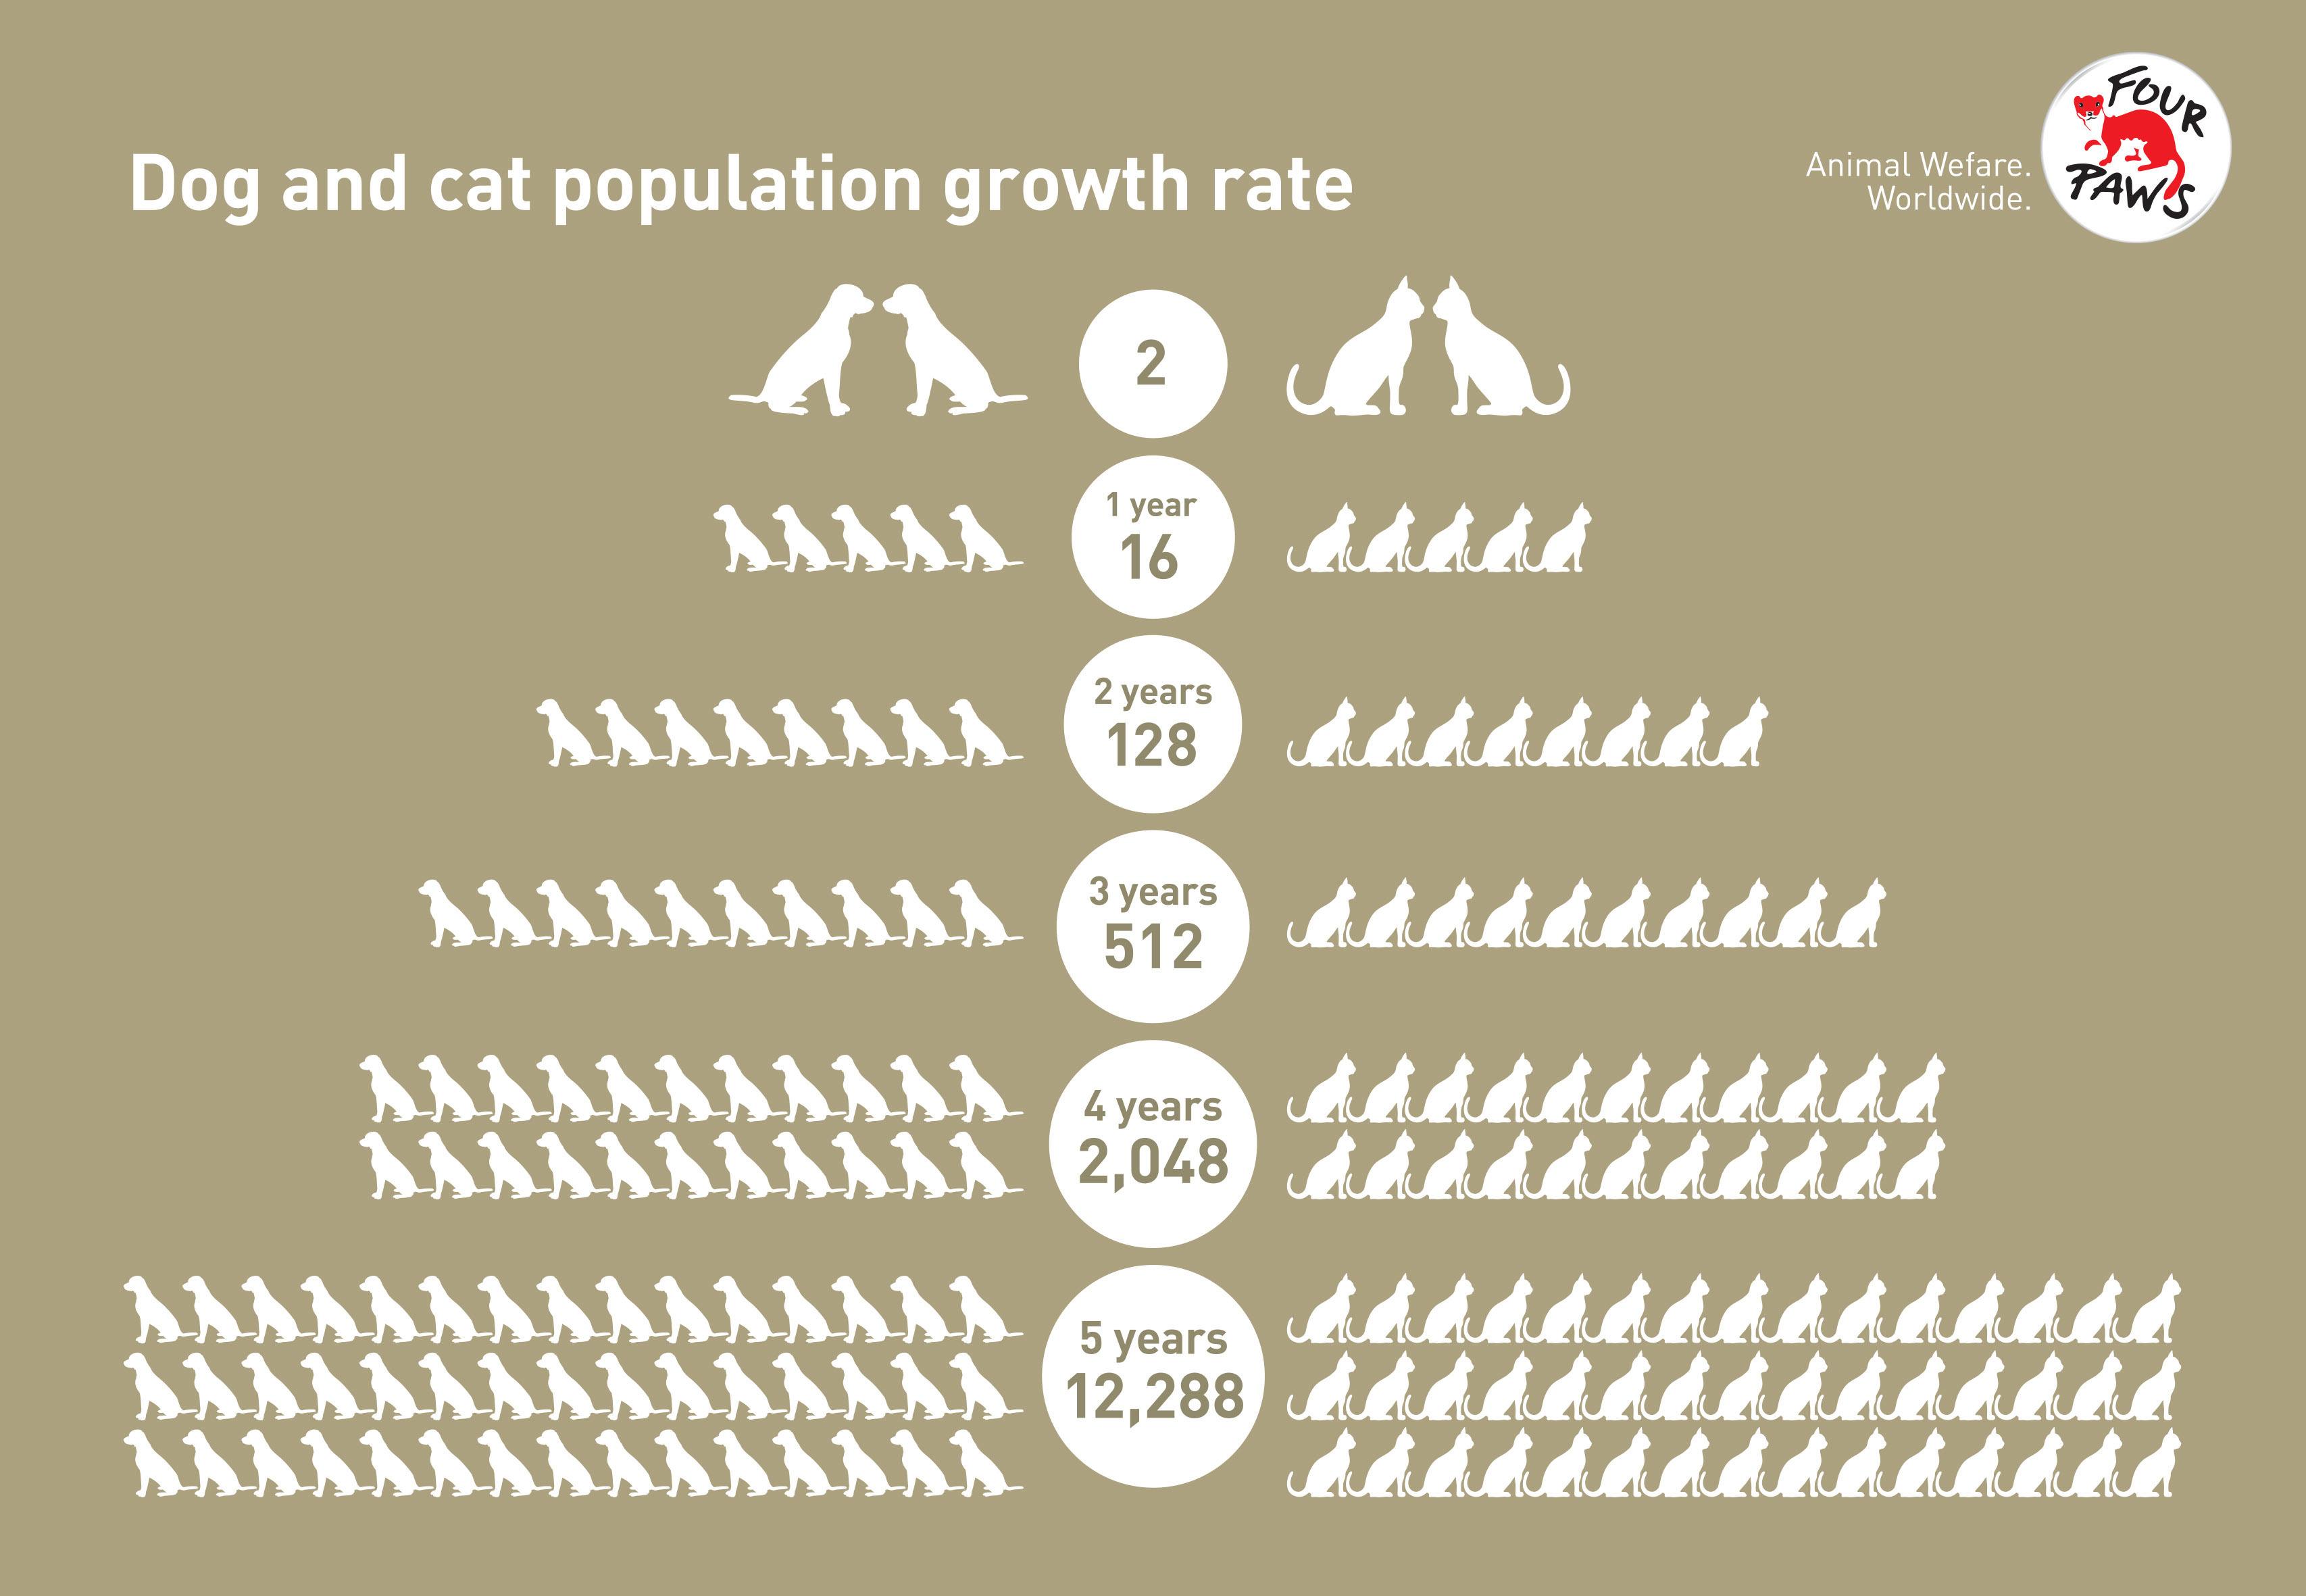 Dog and cat population growth rate